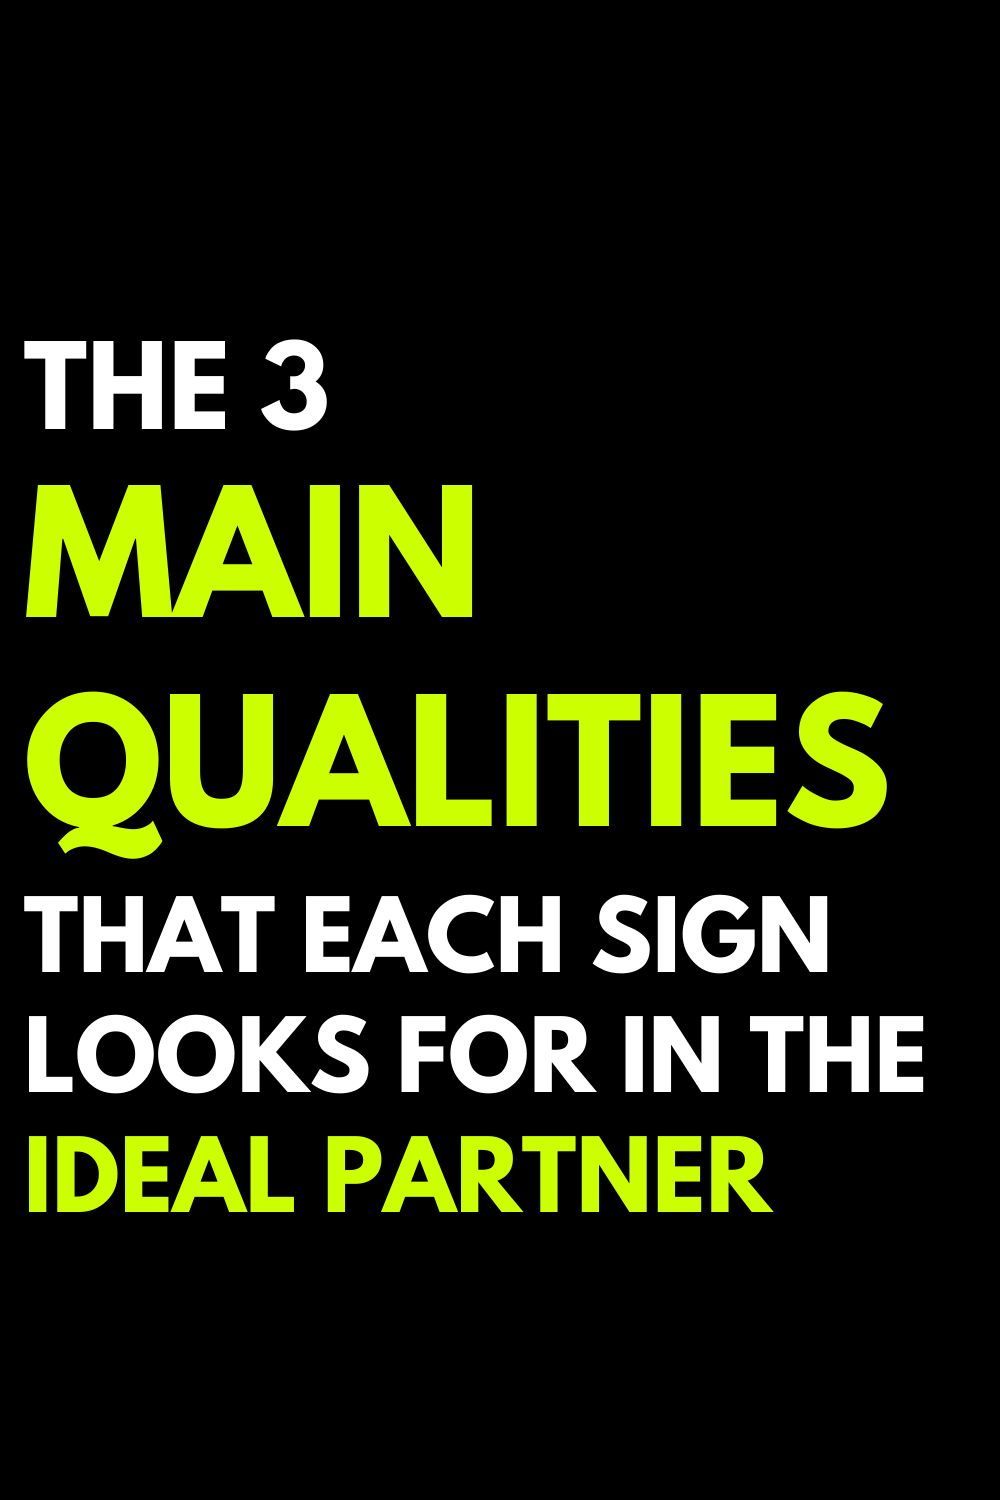 The 3 main qualities that each sign looks for in the ideal partner